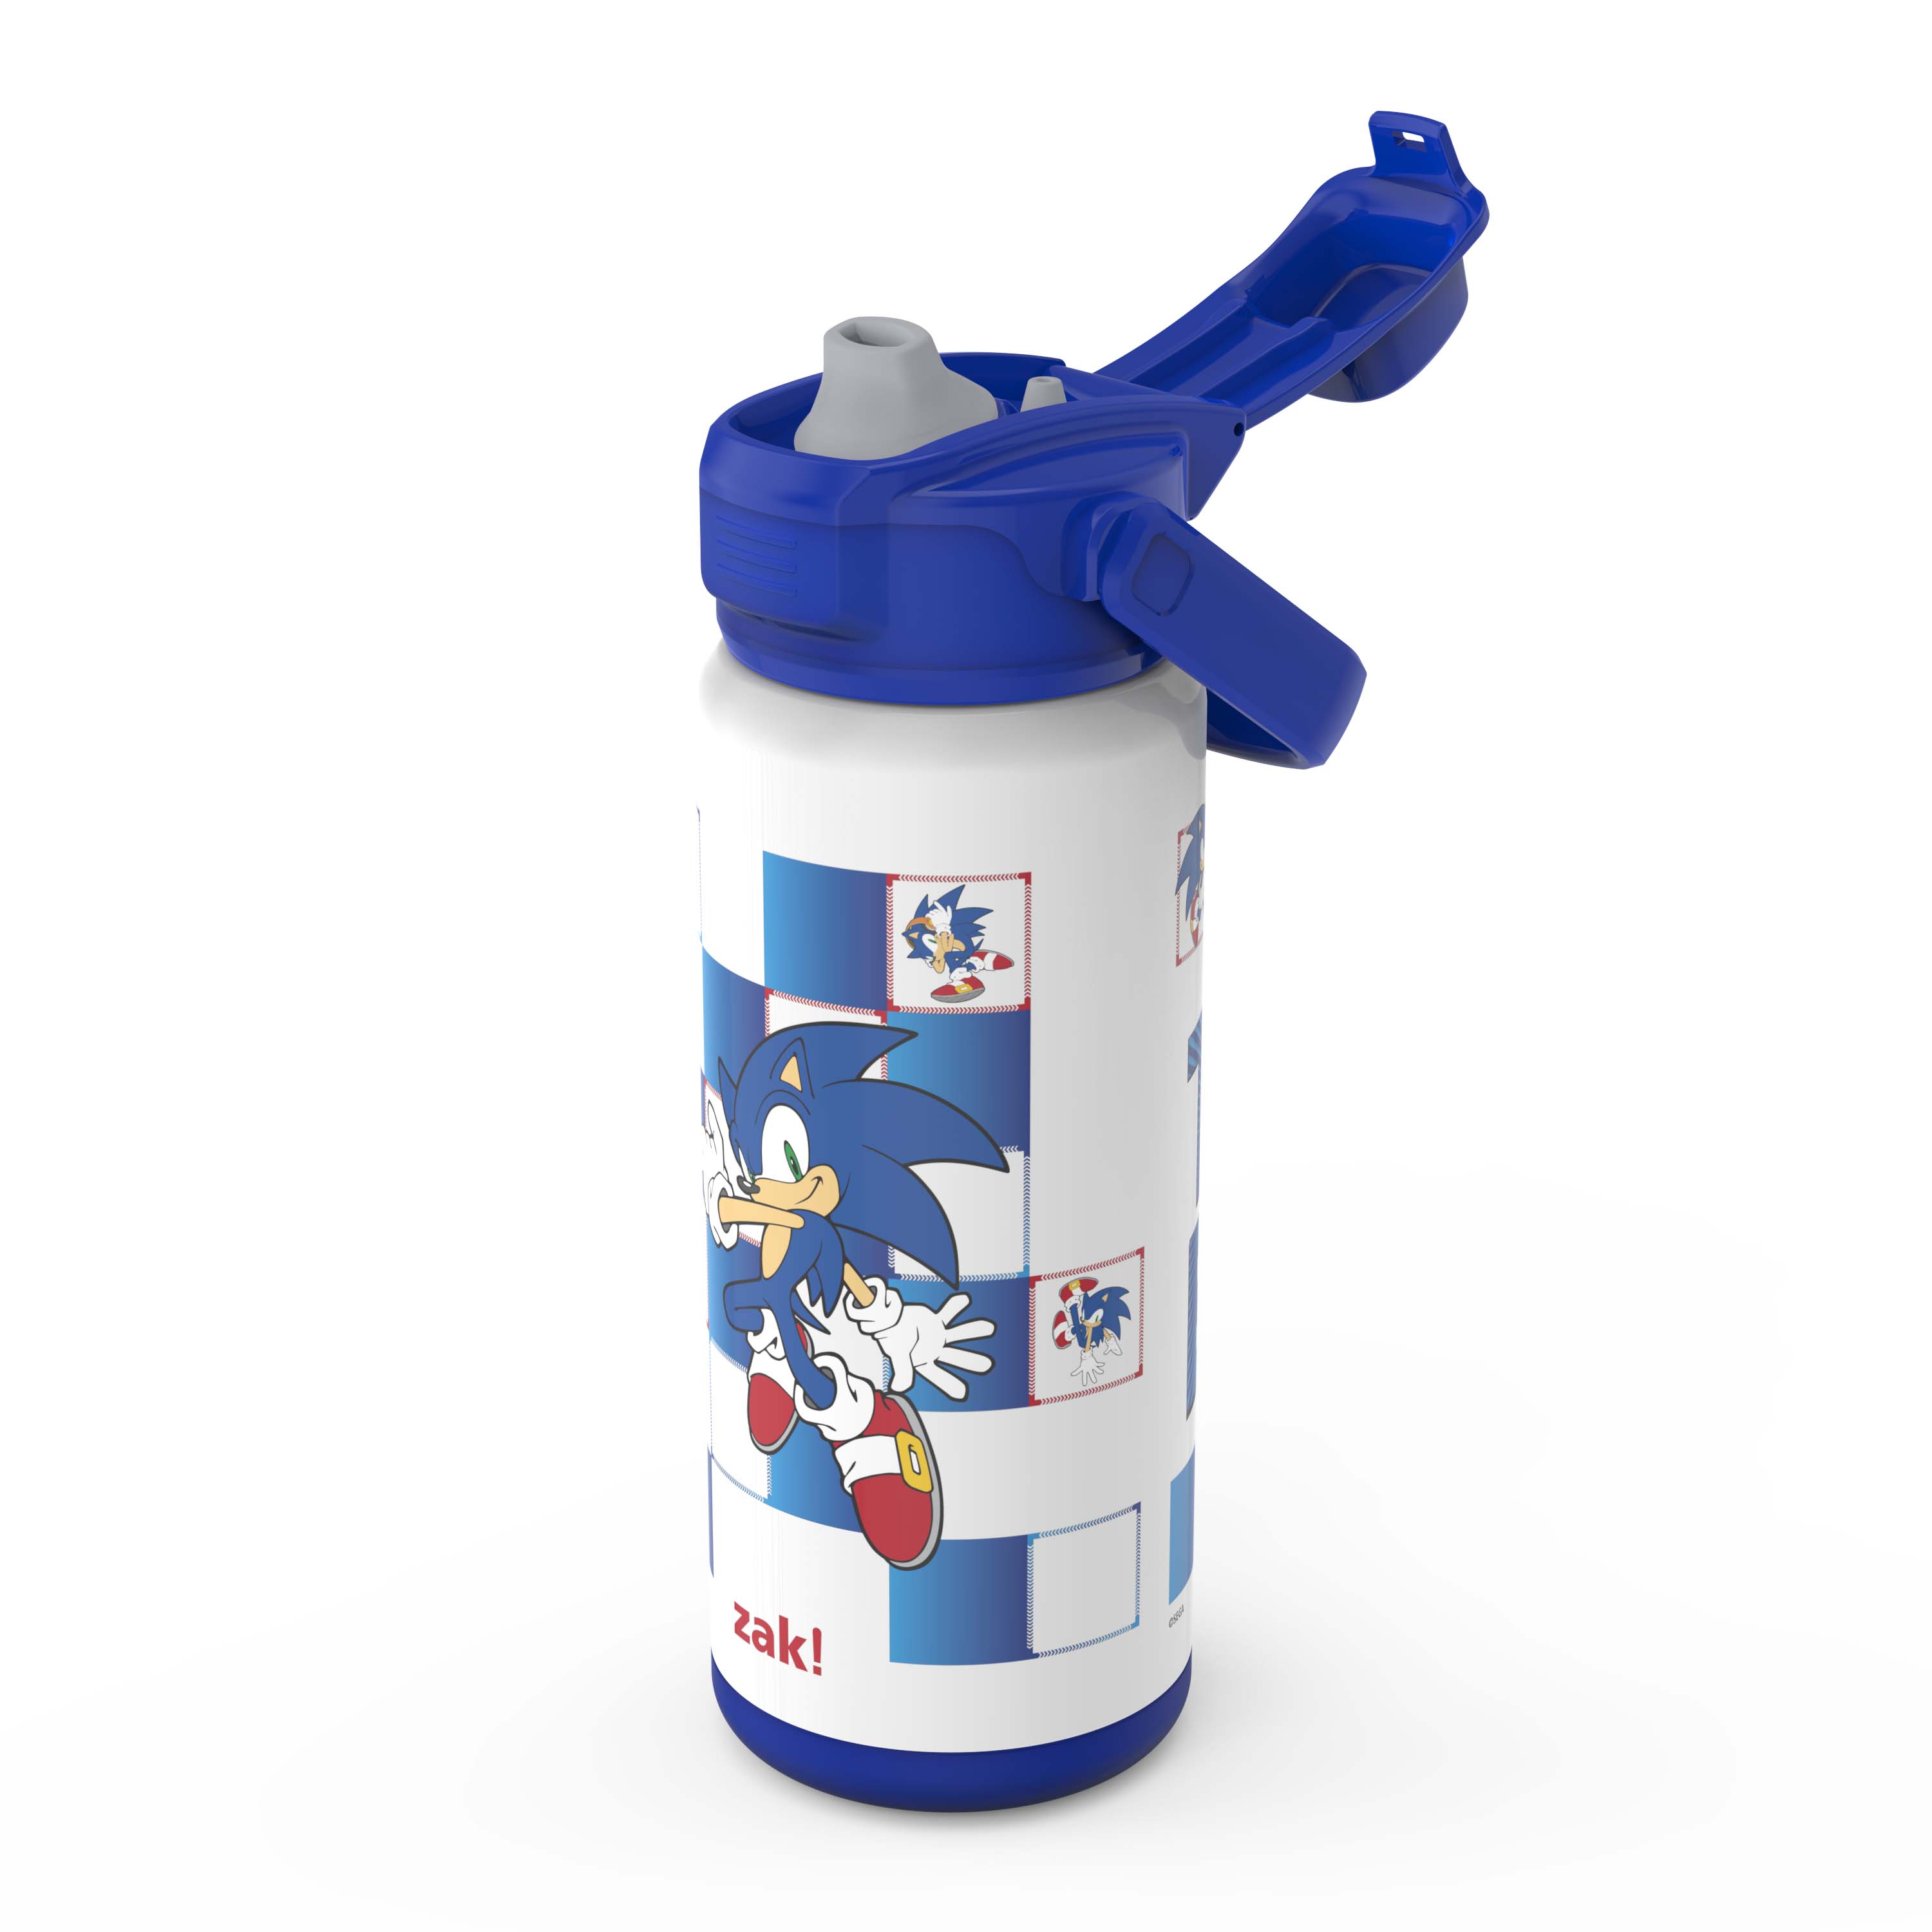 Sonic 12oz Water Bottle Insulated Stainless Steel Kid's Funtainer